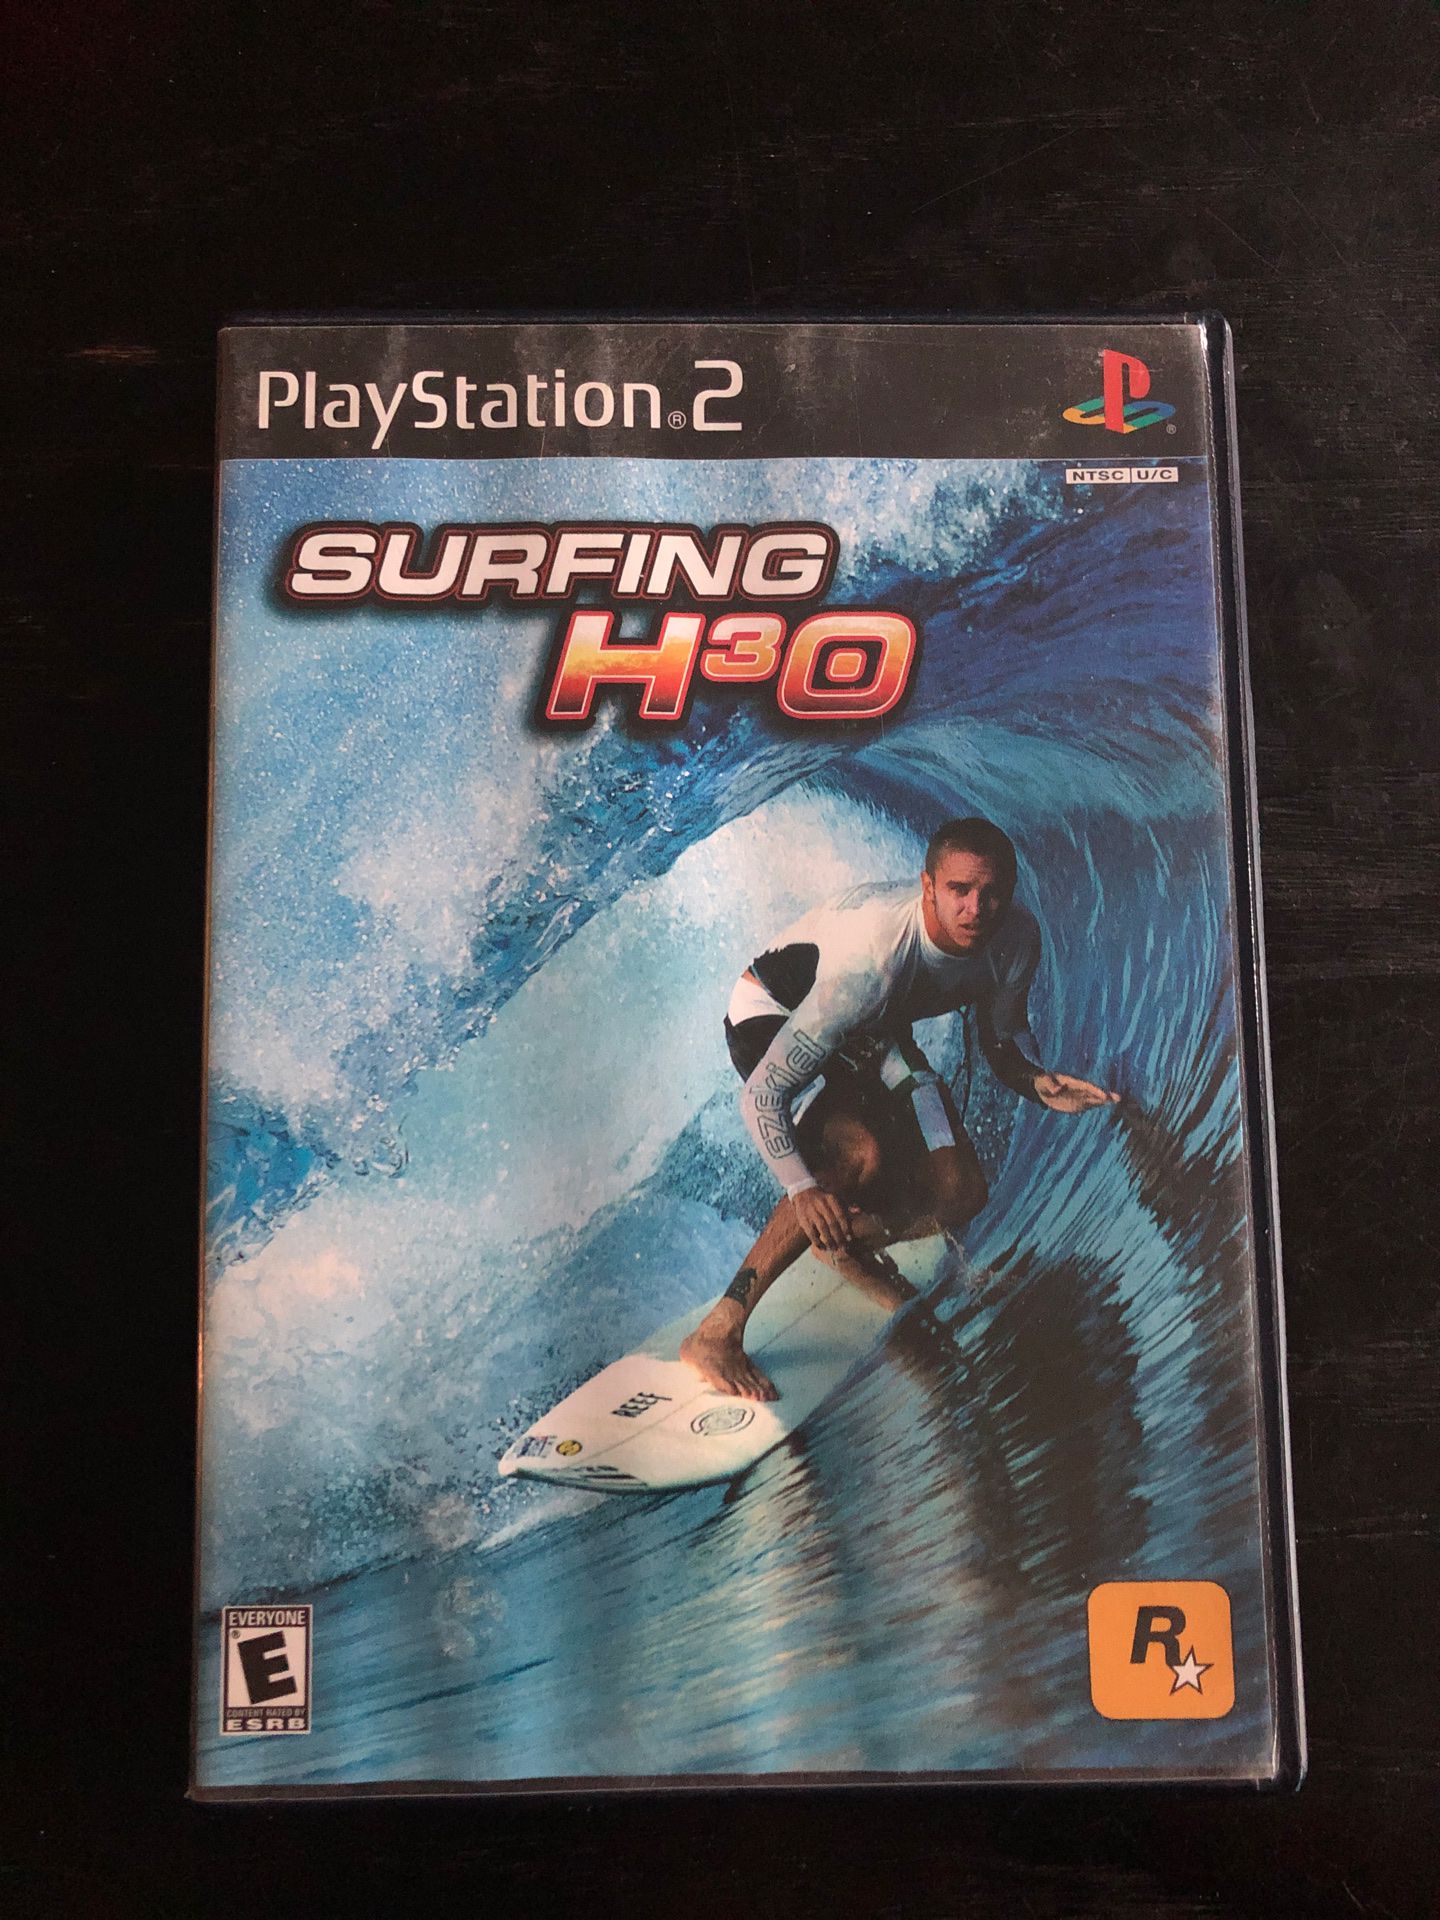 Surfing H3O PS2 game